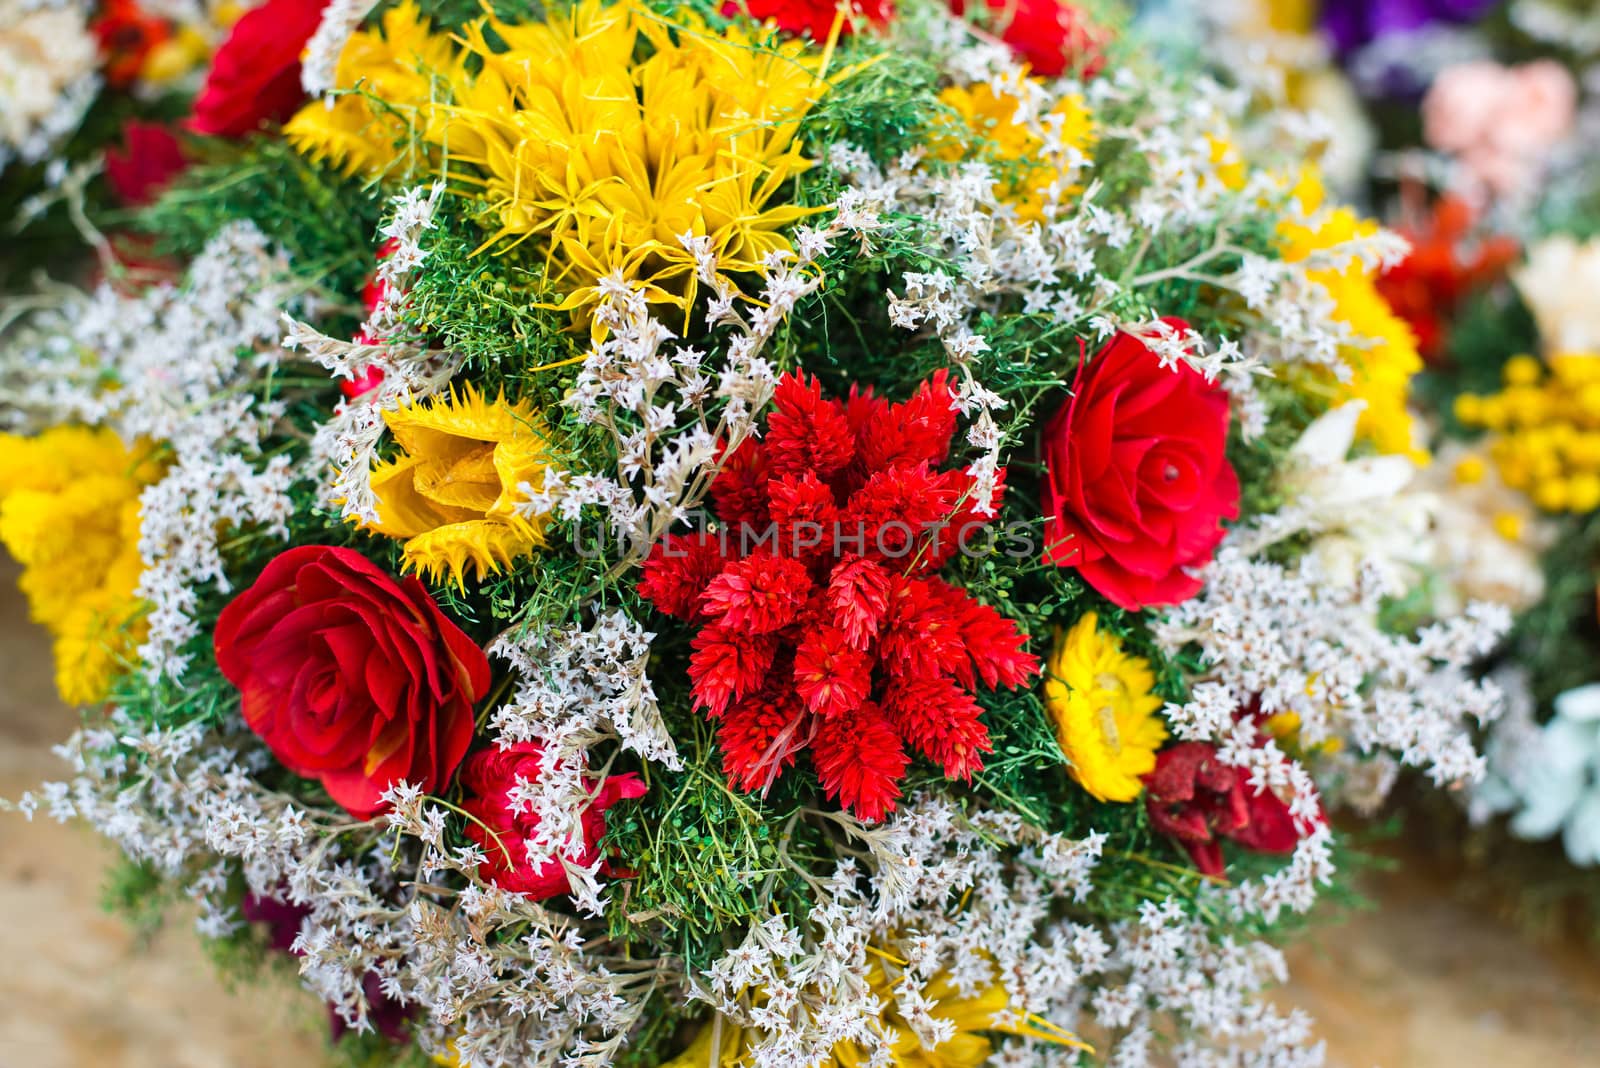 bunch of dryed flowers - shallow DOF picture